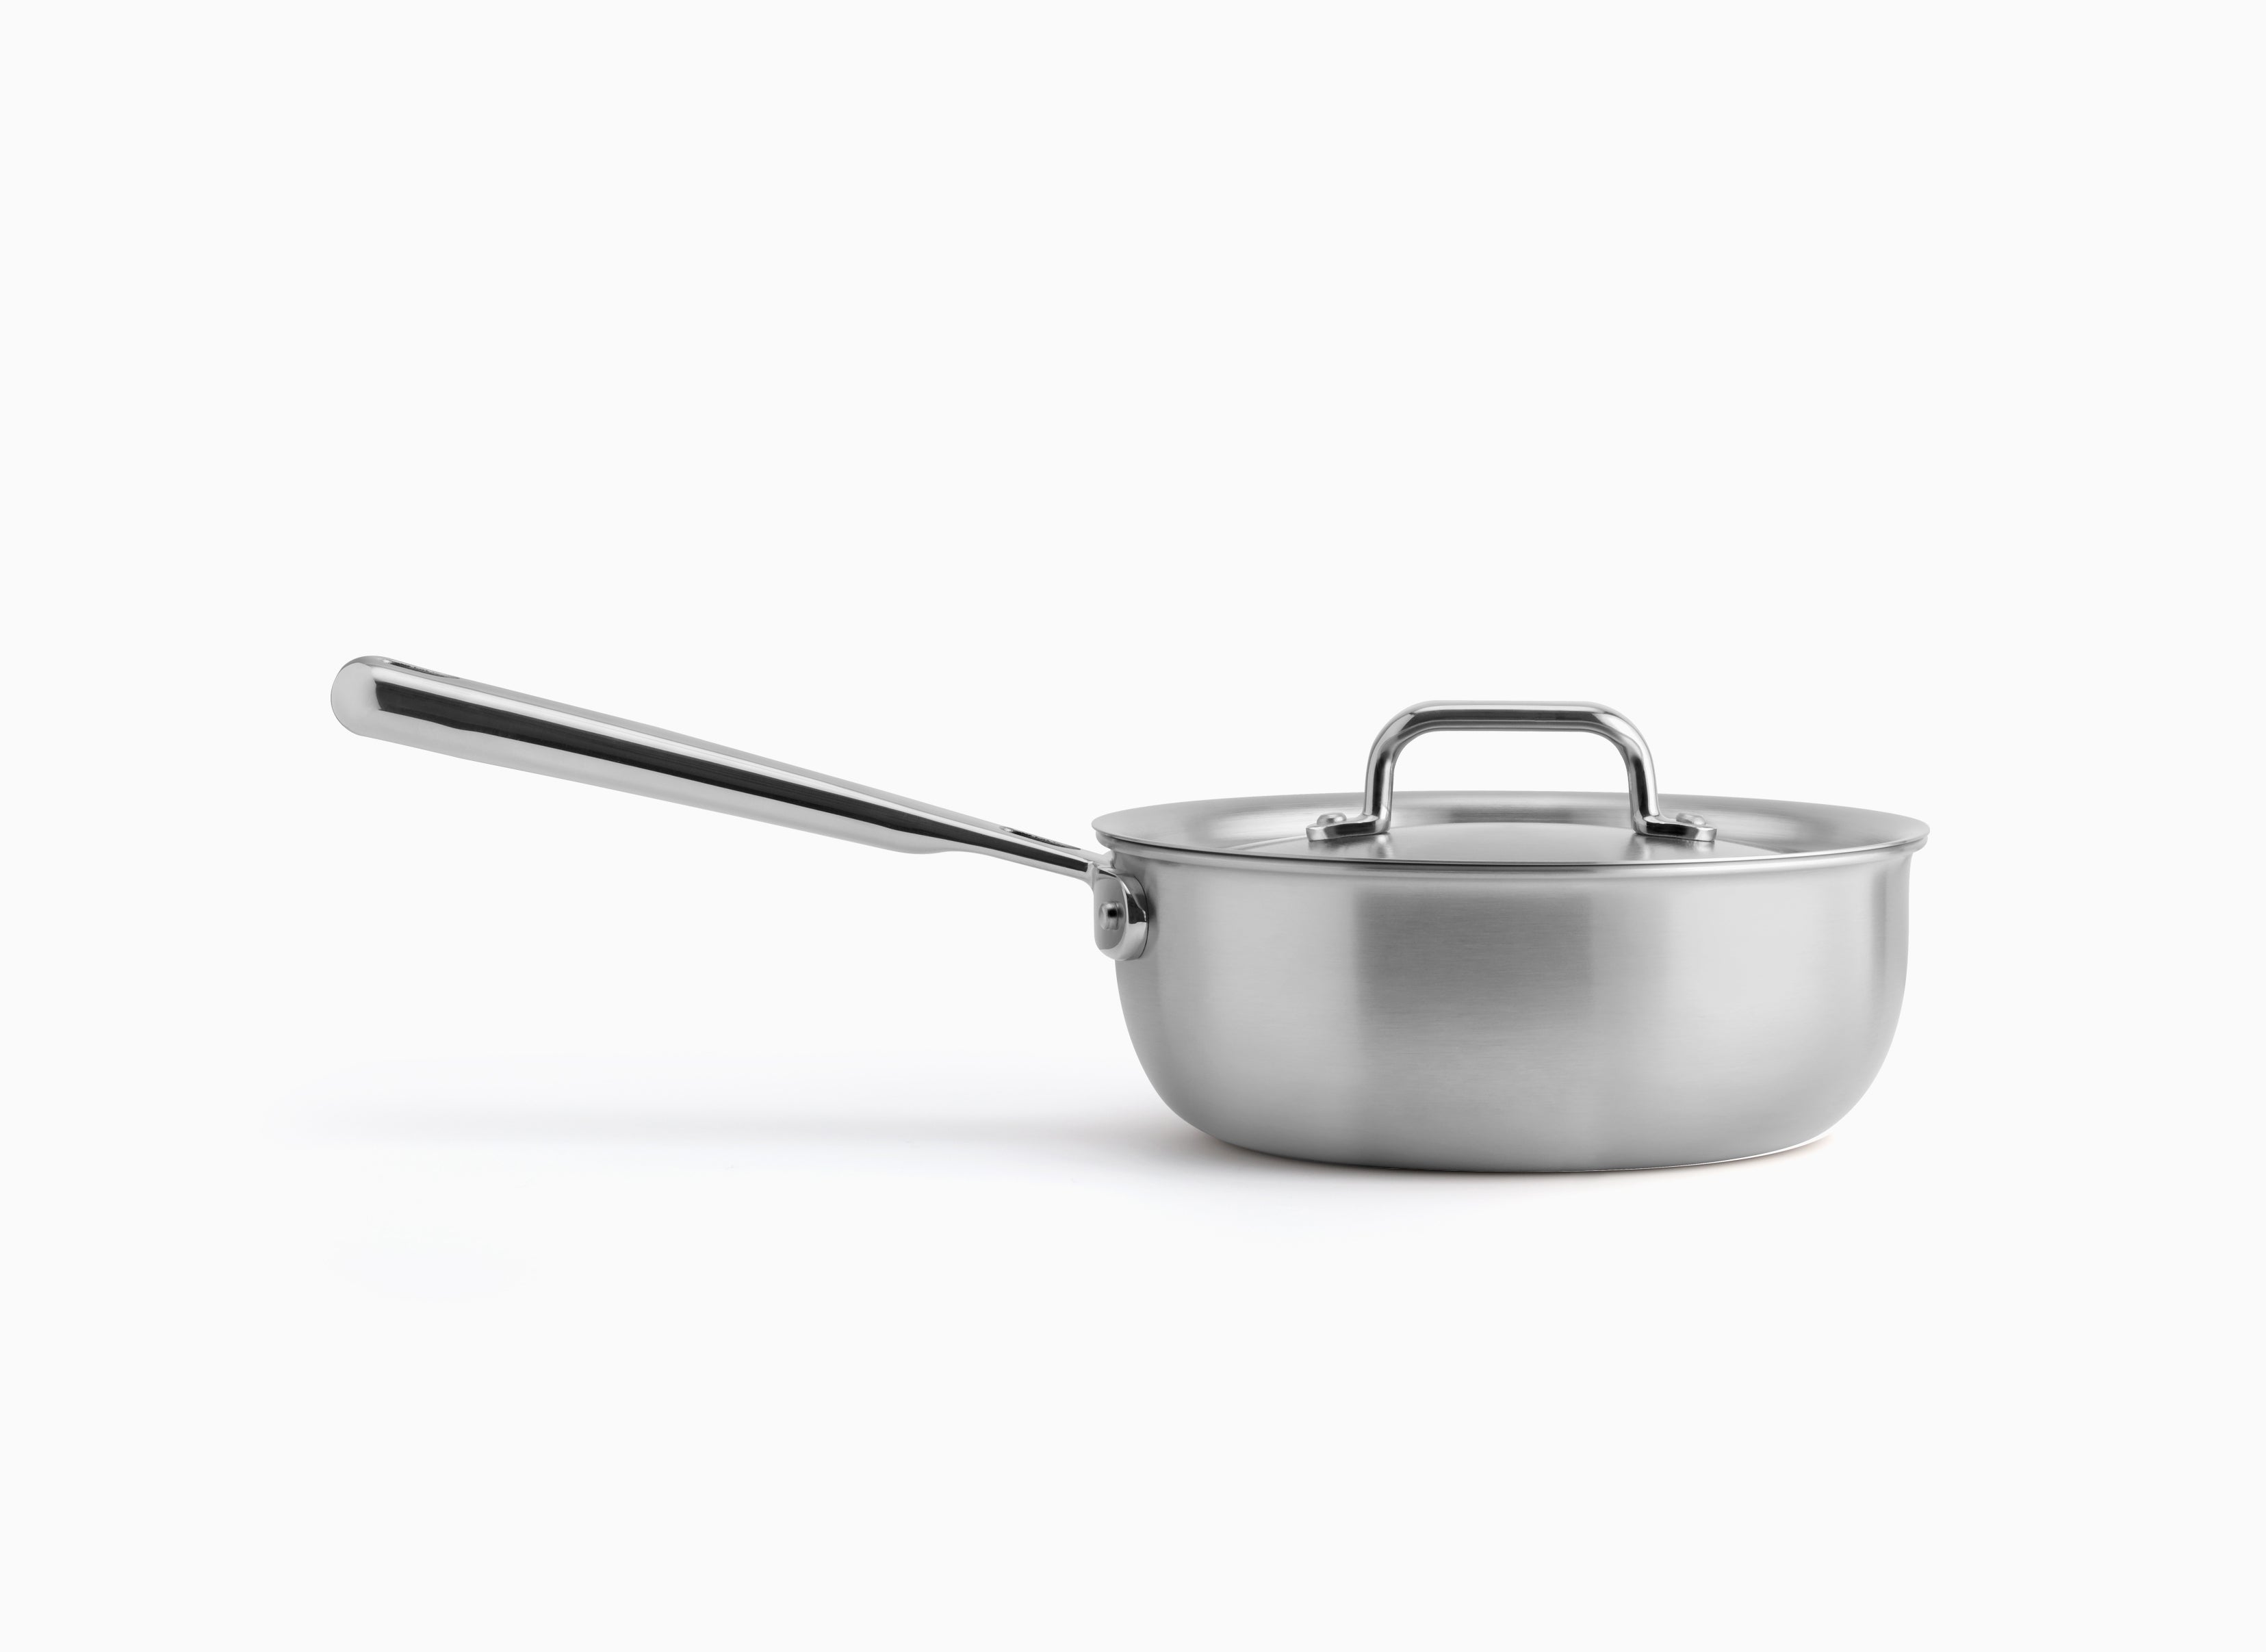  Misen 3 QT Stainless Steel Saucier Pan with Lid - 5-Ply Steel Sauce  Pan: Home & Kitchen